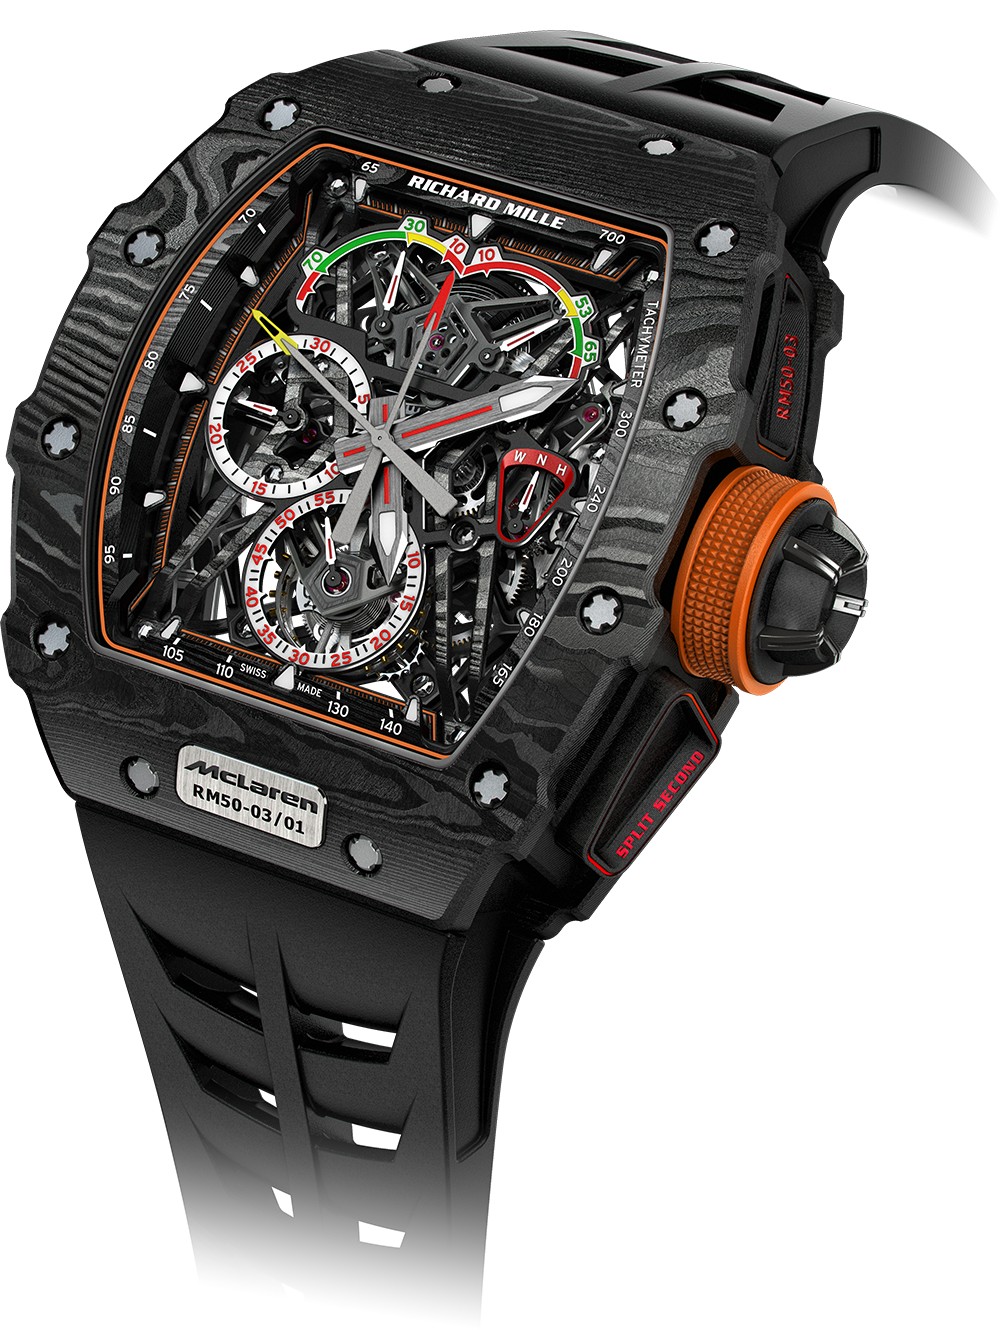 Richard Mille RM60-01 Automatic Winding Flyback Chronograph RegattaRichard Mille RM60-01 Regatta Flyback Chronograph Titanium